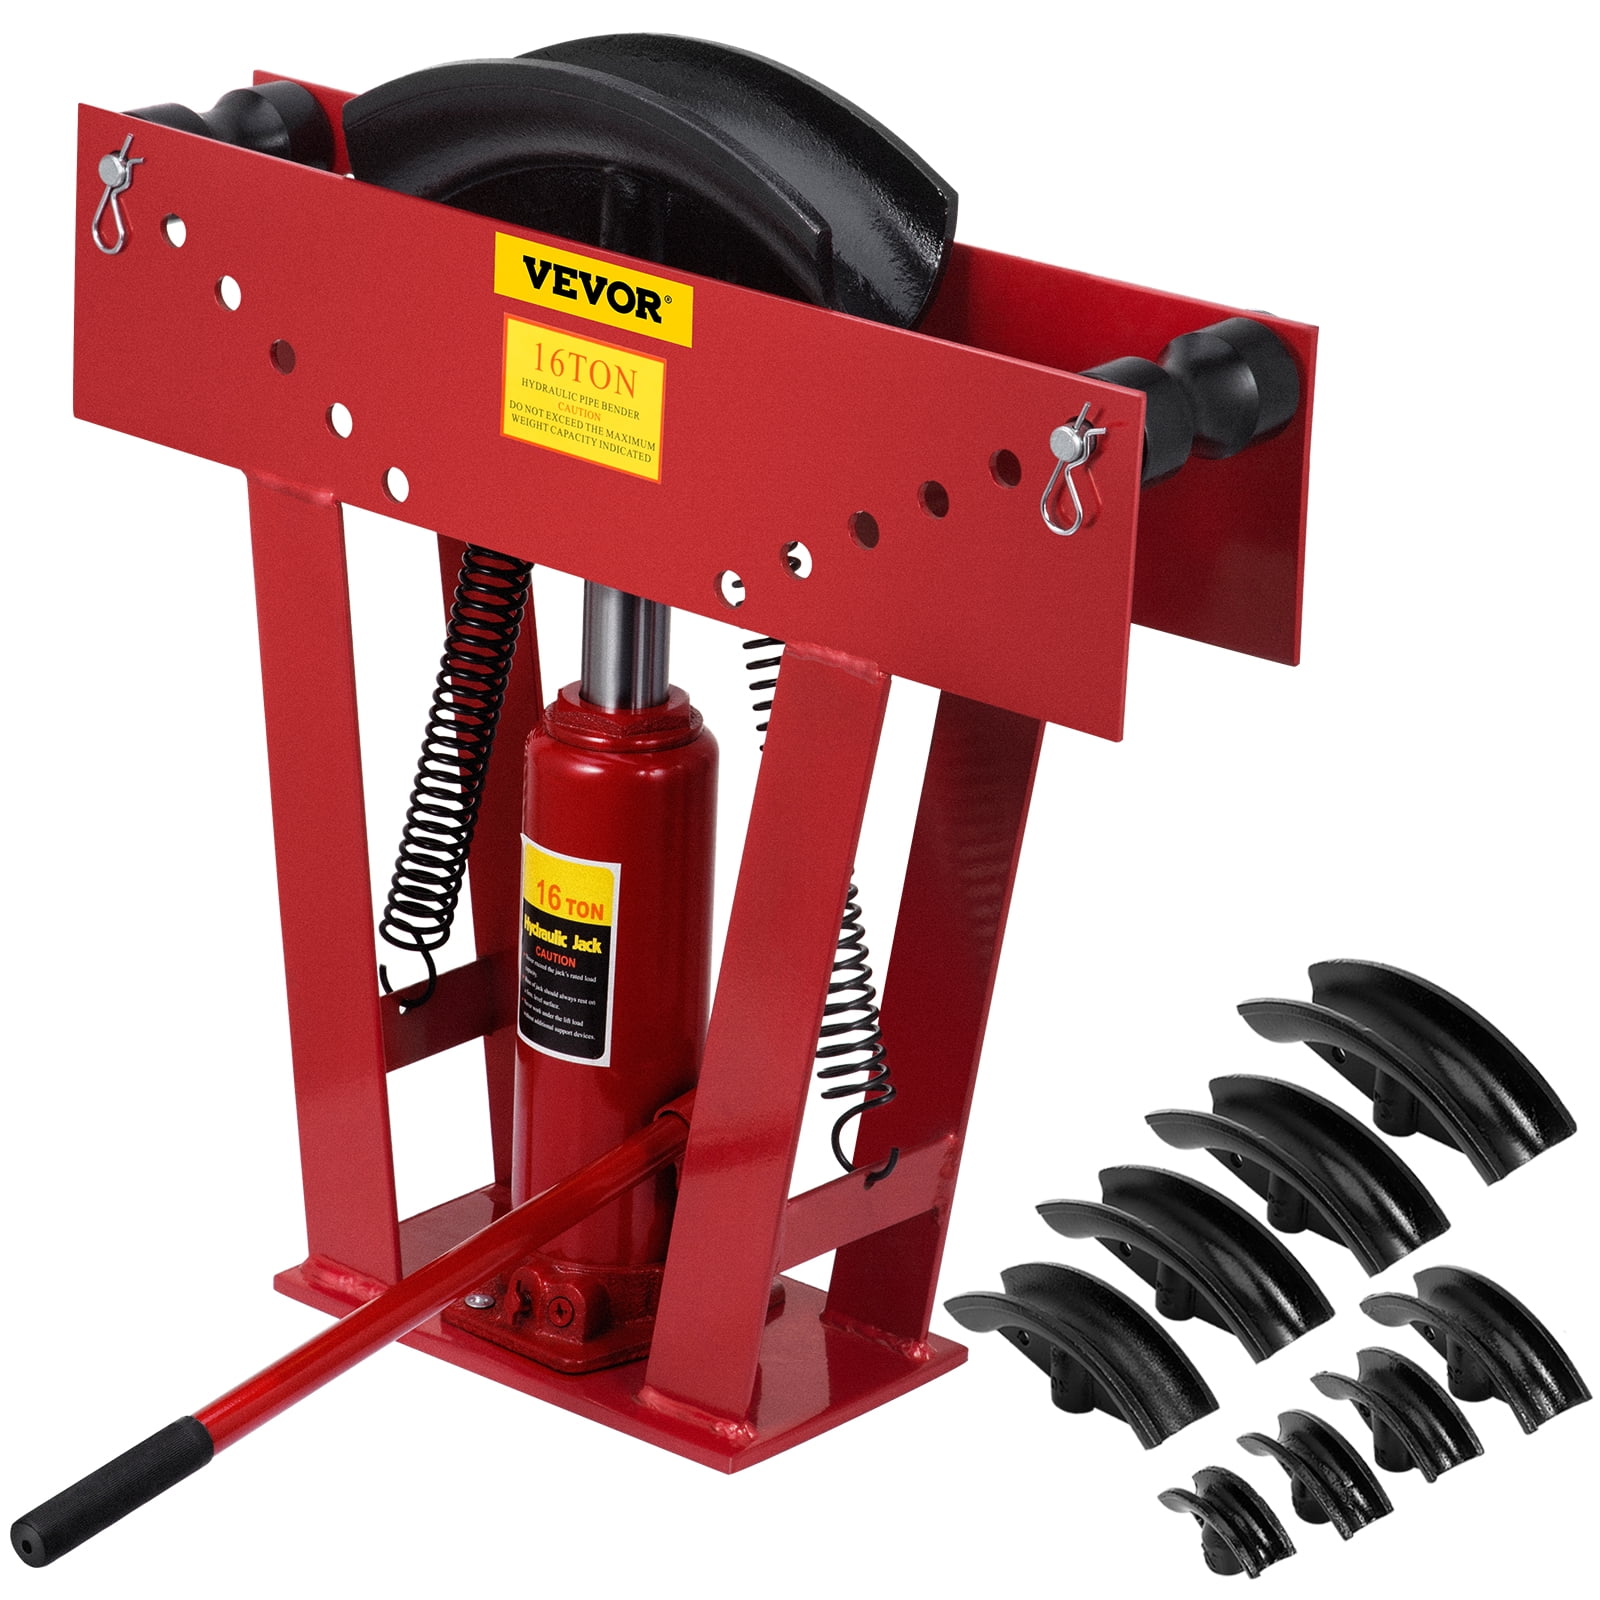 12 Ton Hydraulic Pipe Bender 1/2" 2" Gas Air Pipe Bending Tool 180° Portable 